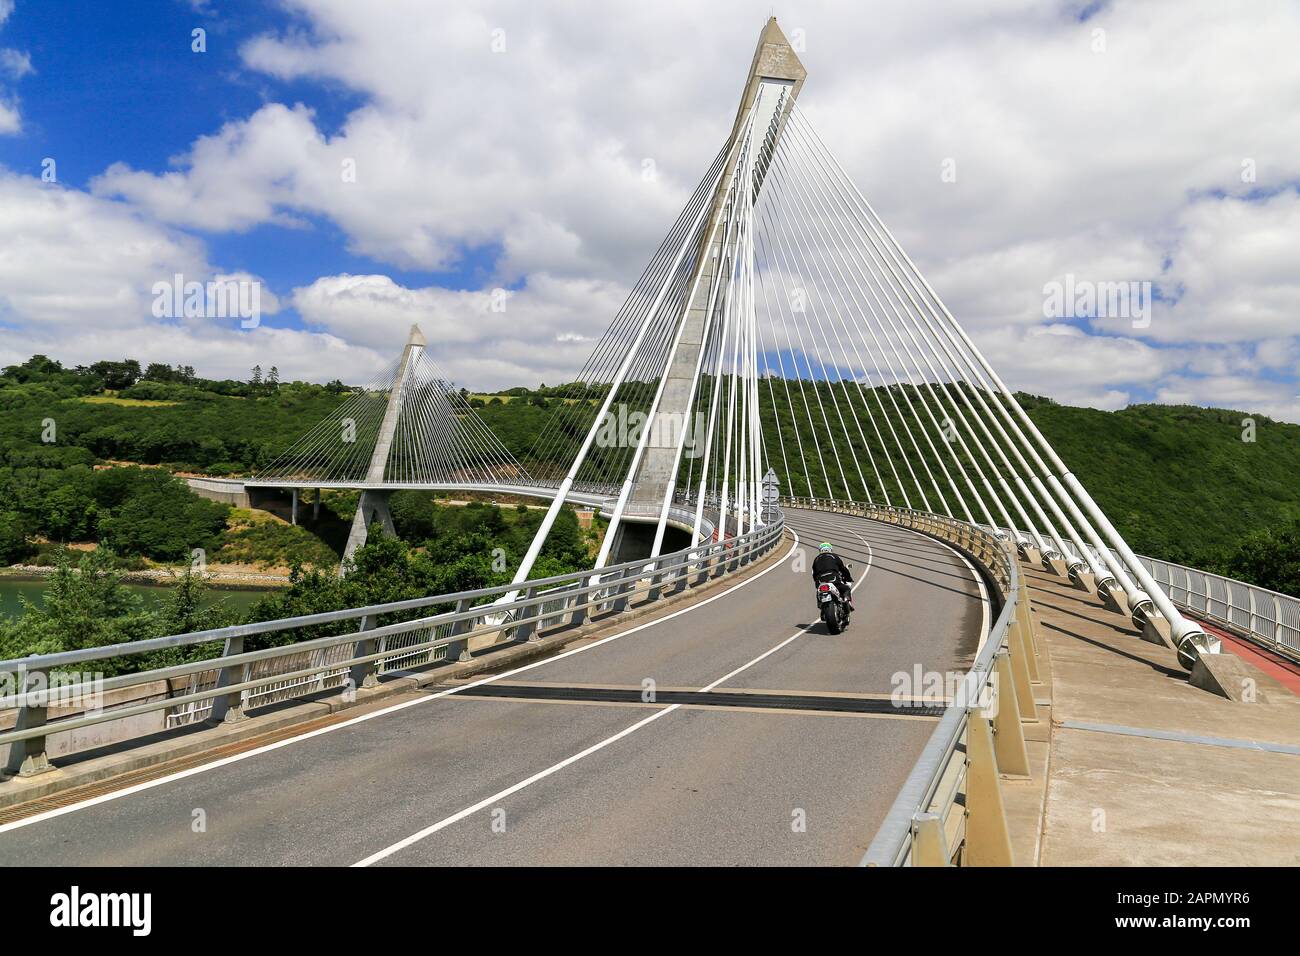 Solo motorcycle crossing modern, curved, suspension bridge in France. Stock Photo